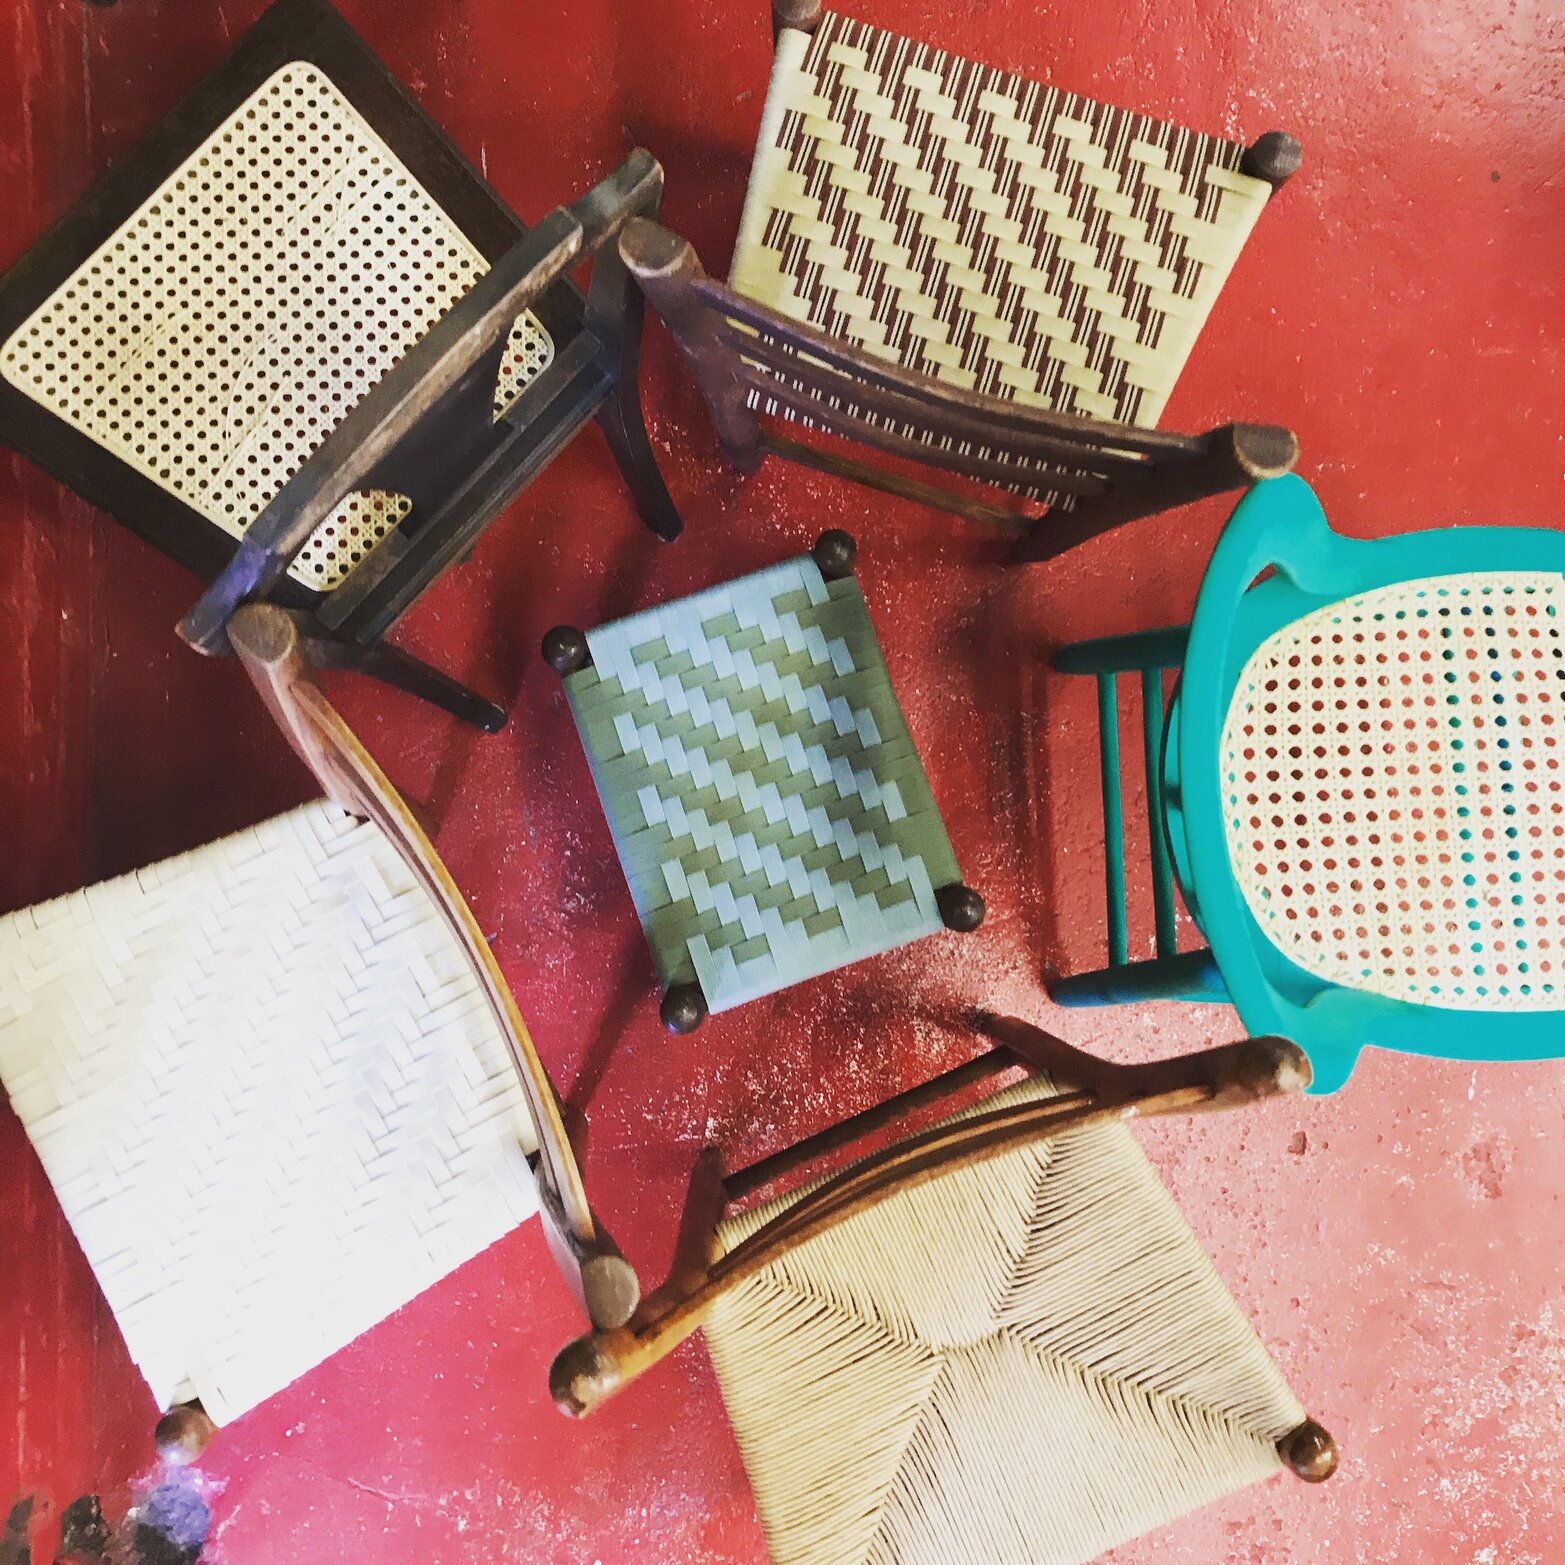 Chair caning classes SRCCC